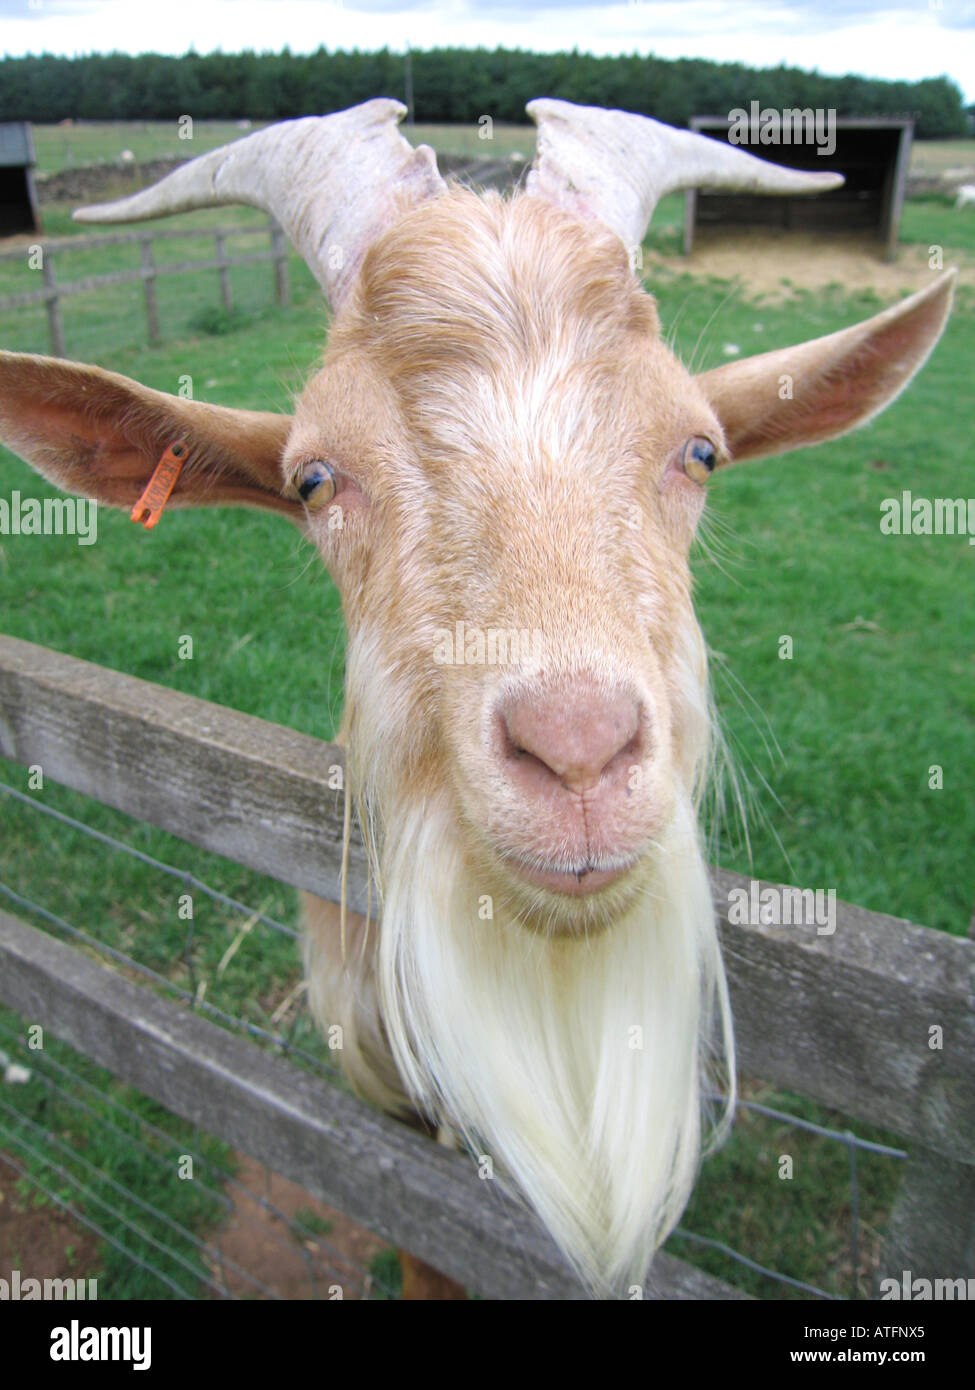 Goat head and face close up over fence Stock Photo